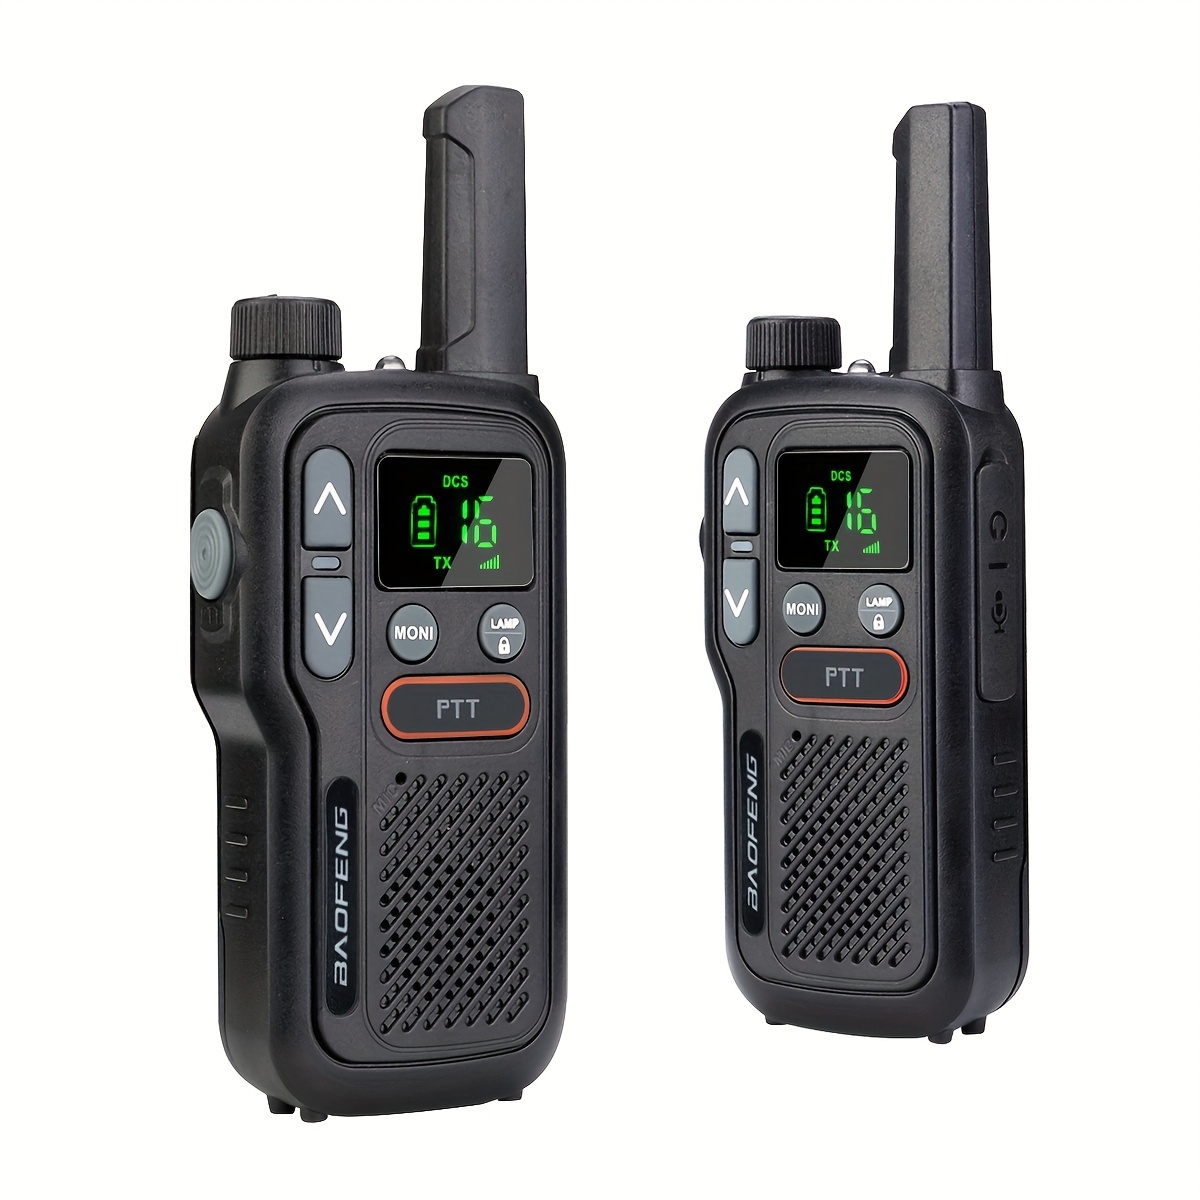 Baofeng BF-W31 Waterproof Walkie-talkie - Portable IP55 Two Way Radio with  Clear Sound and Long Range Communication